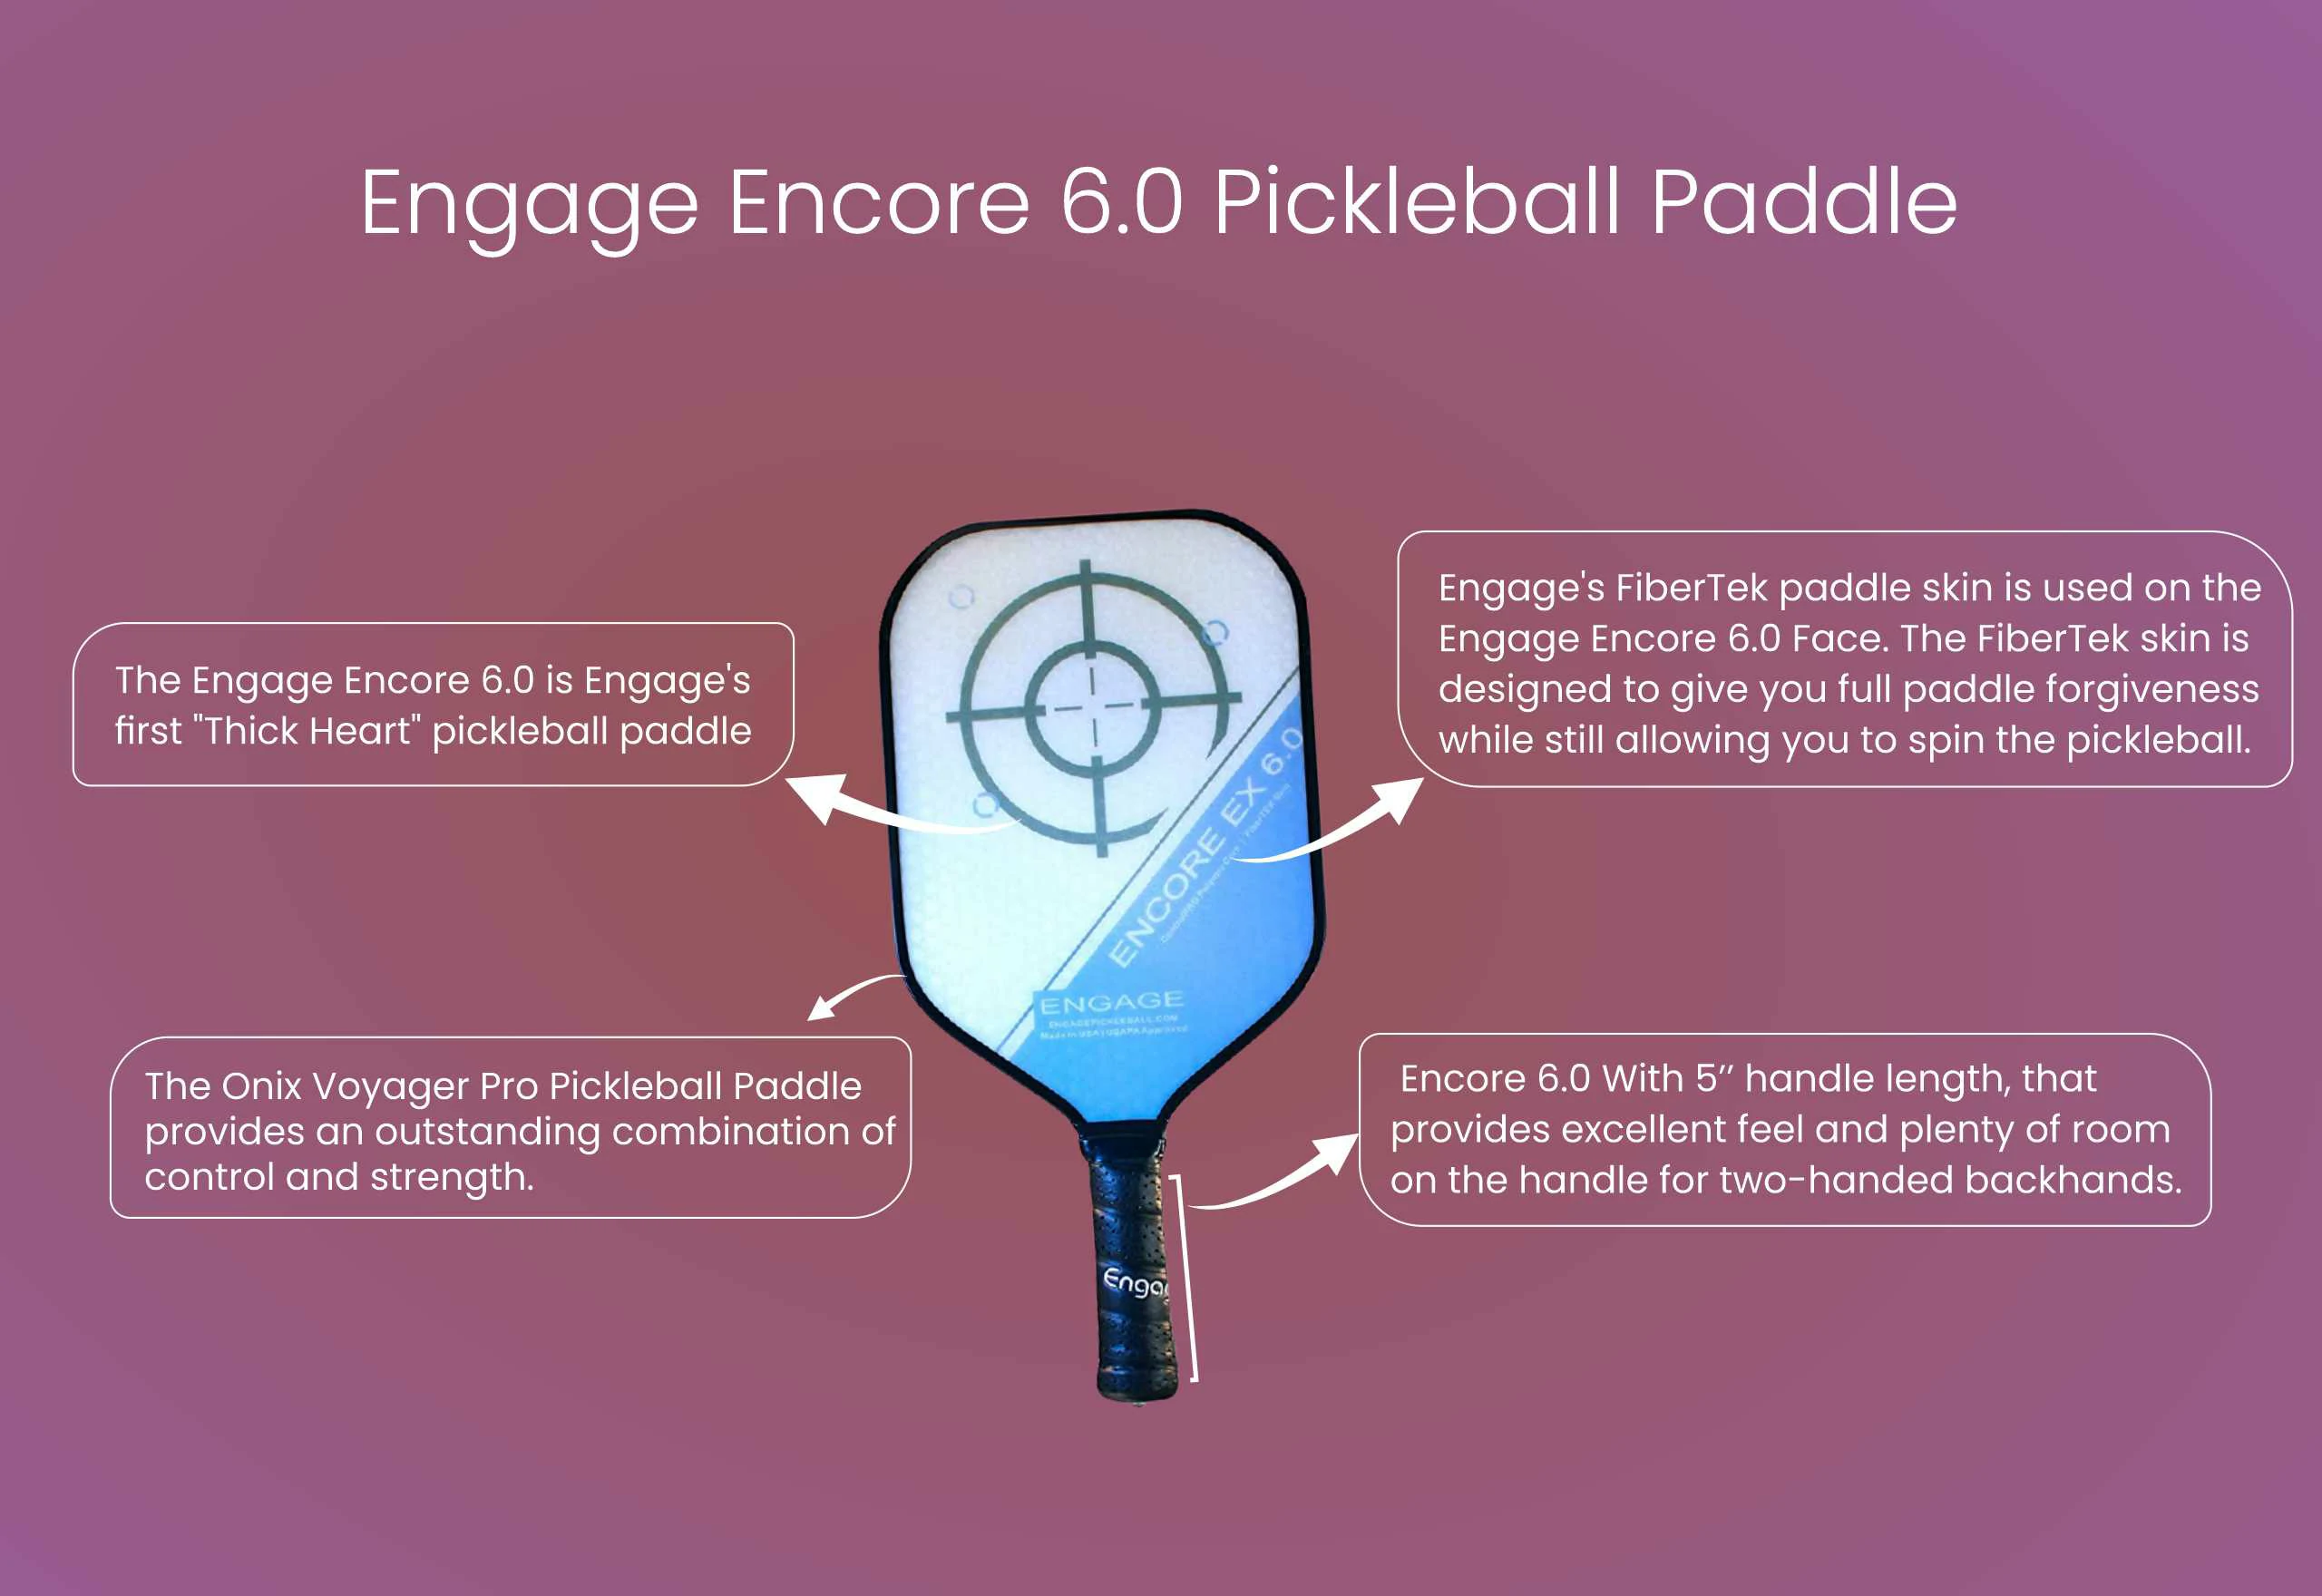 Engage Encore 6.0 Pickleball Paddle infographic